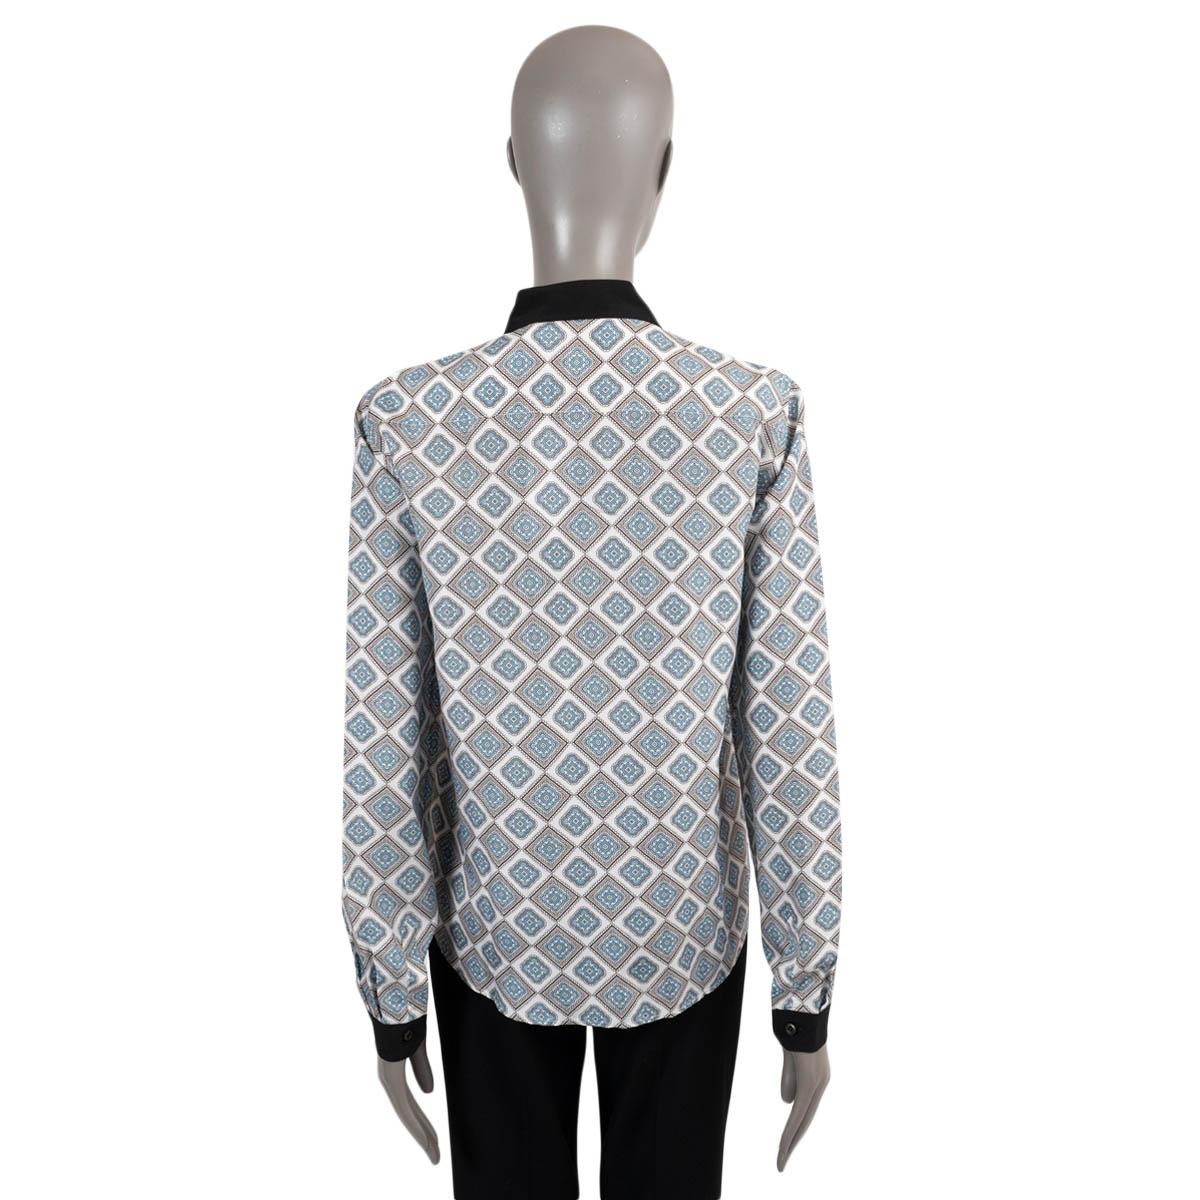 PRADA light blue black white silk GEOMETRIC SPECIAL EDITION Blouse Shirt 42 M In Excellent Condition For Sale In Zürich, CH